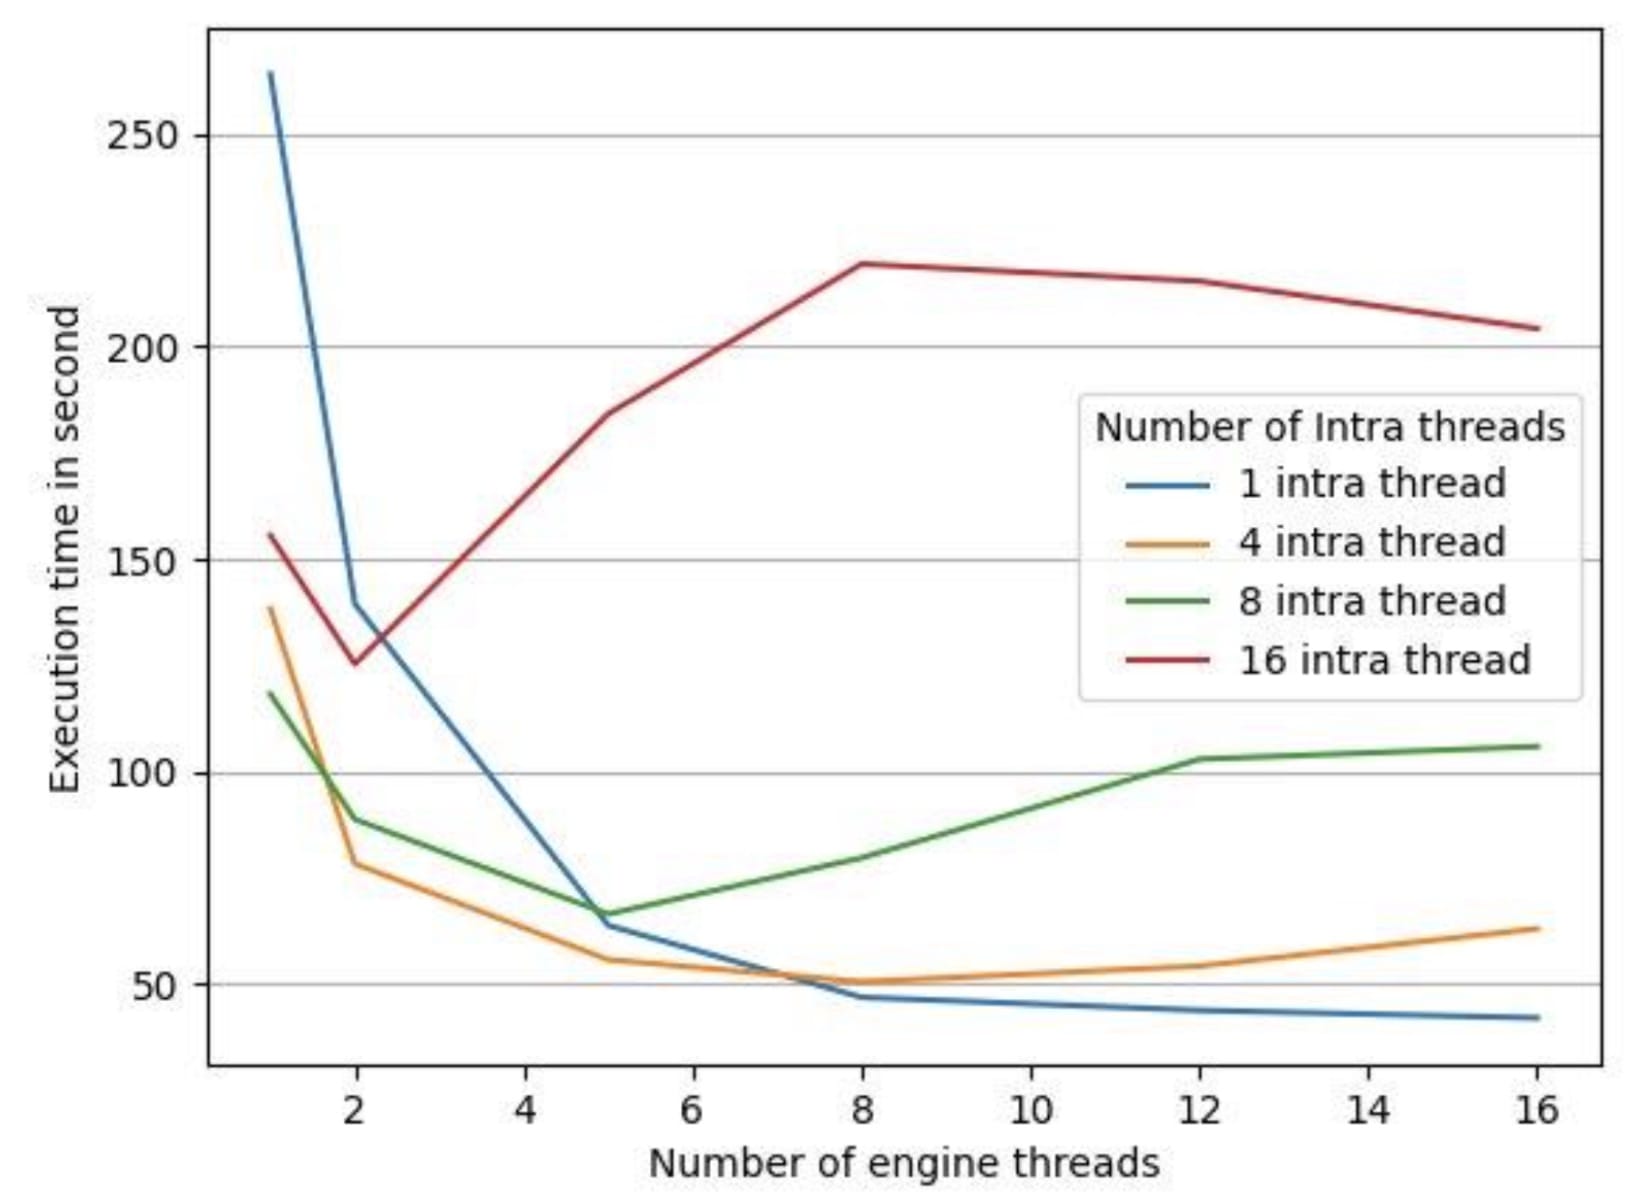 Figure 4: Processing times for different number of engine threads